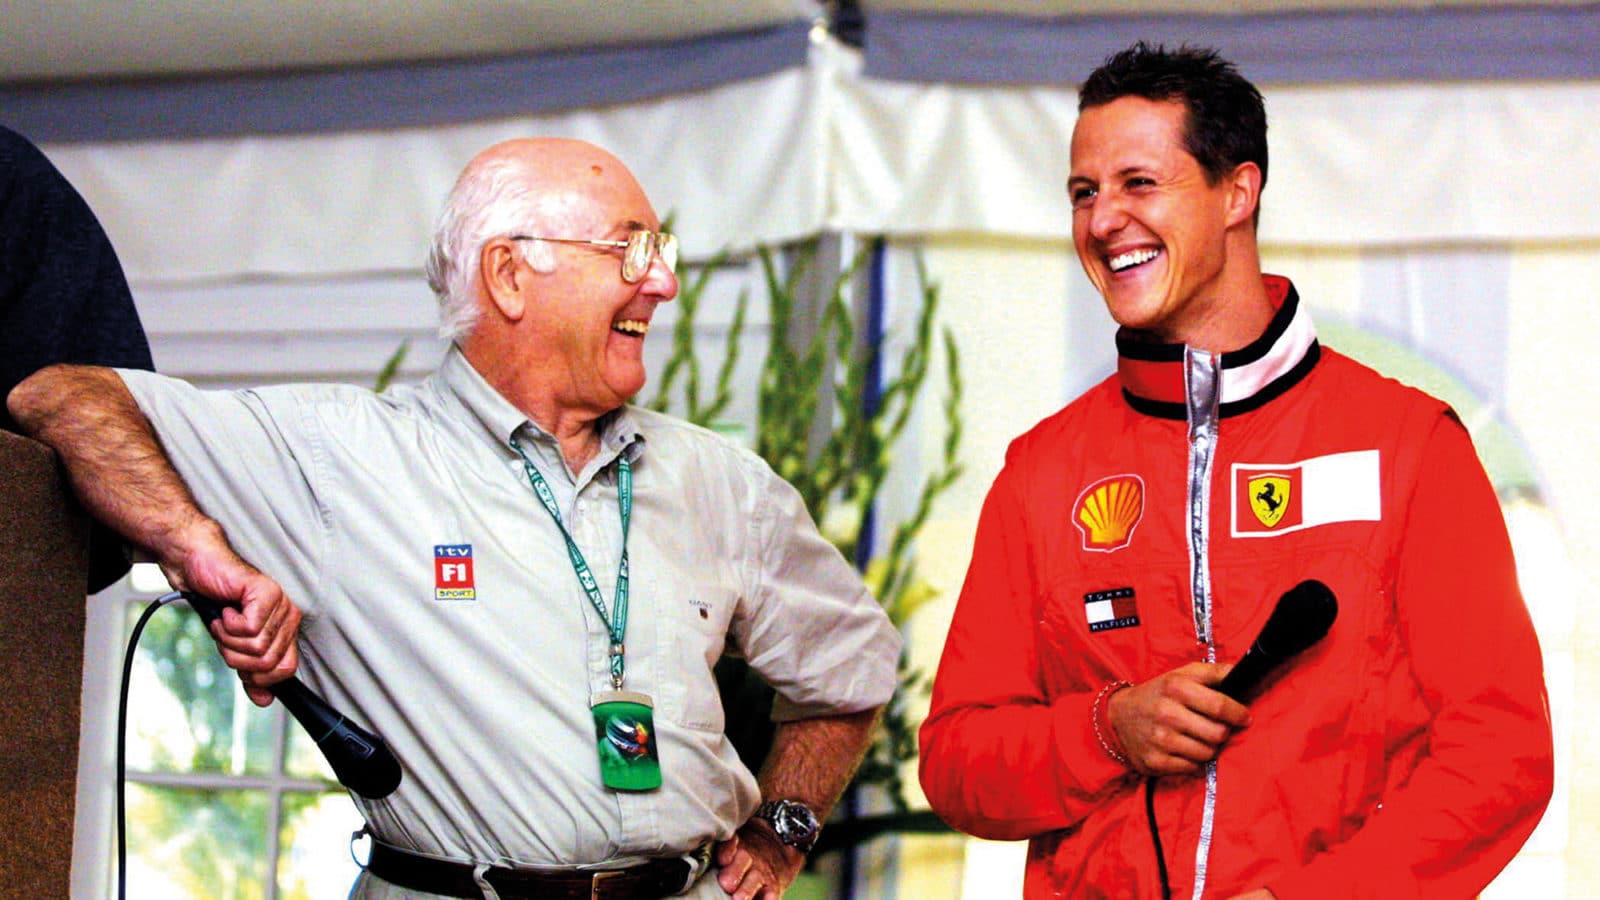 Murray Walker with Michael Schumacher and mic